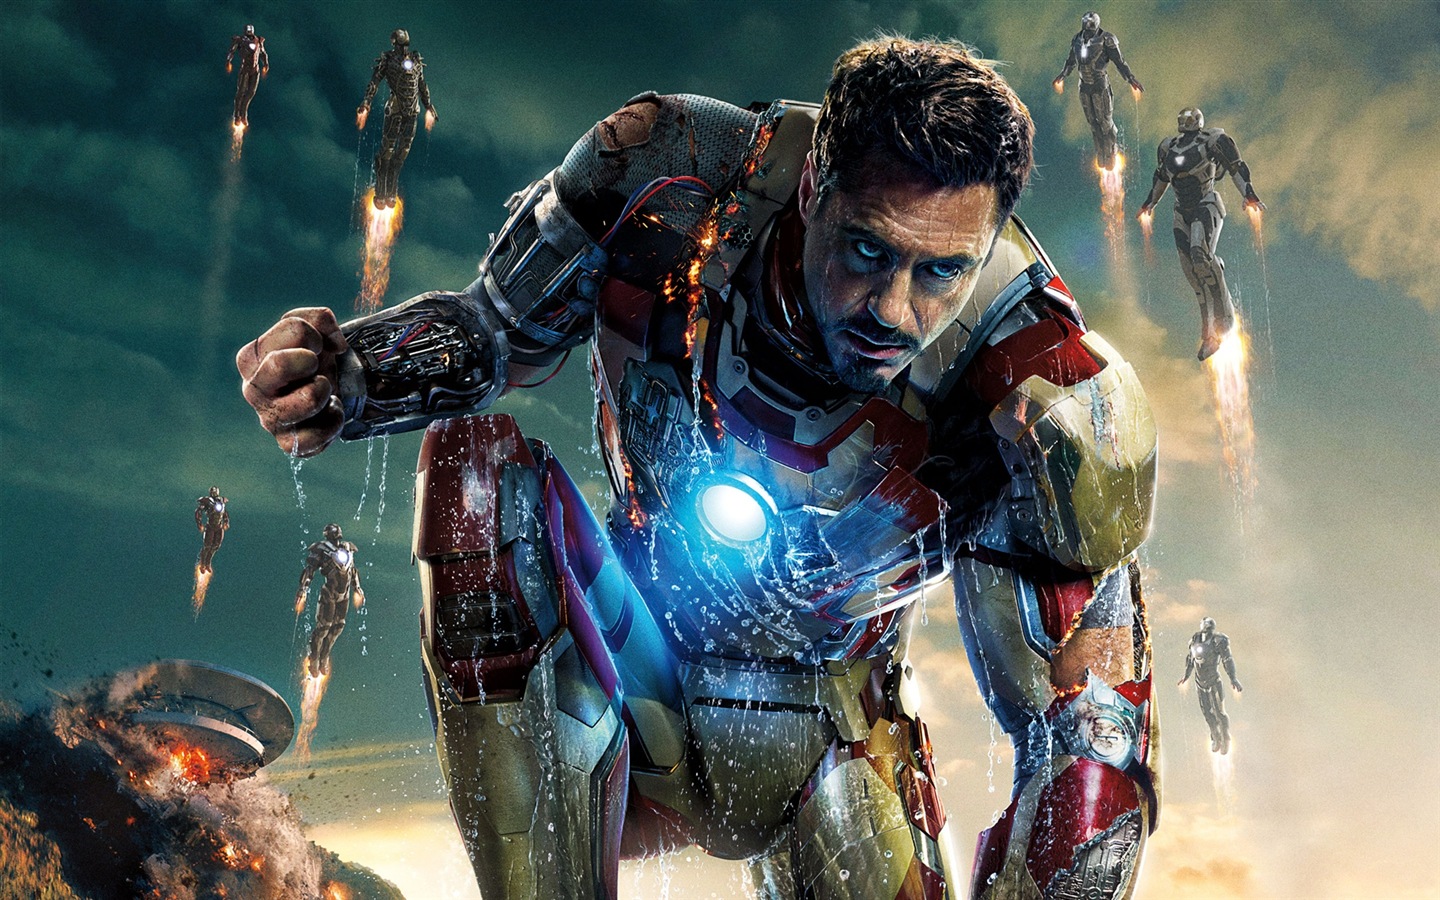 2013 Iron Man 3 newest HD wallpapers #12 - 1440x900